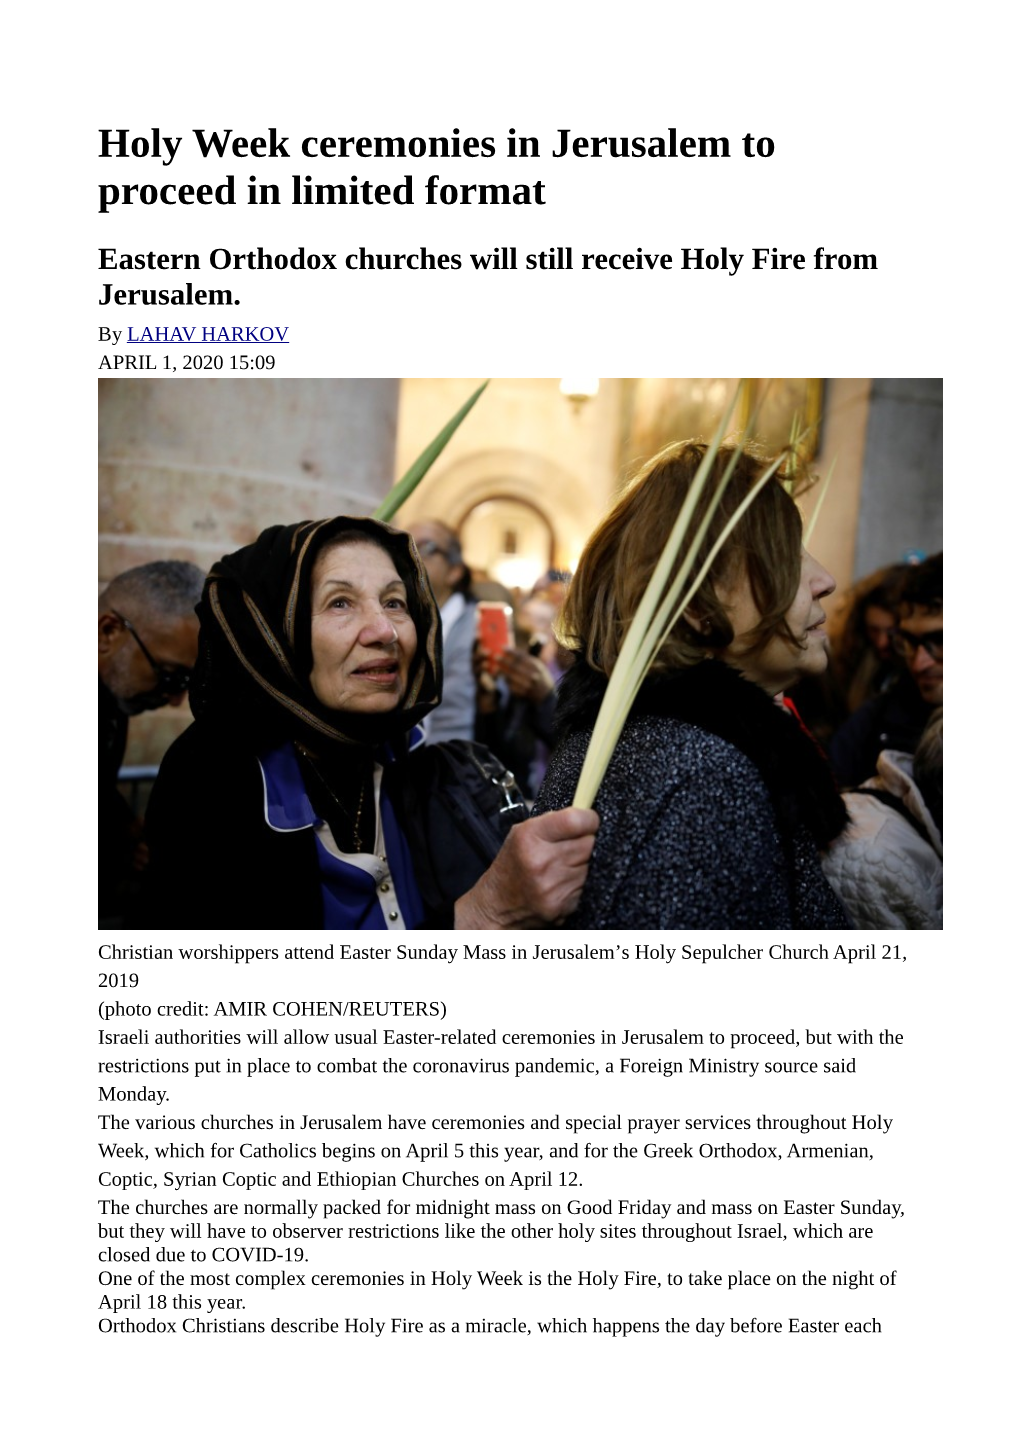 Holy Week Ceremonies in Jerusalem to Proceed in Limited Format